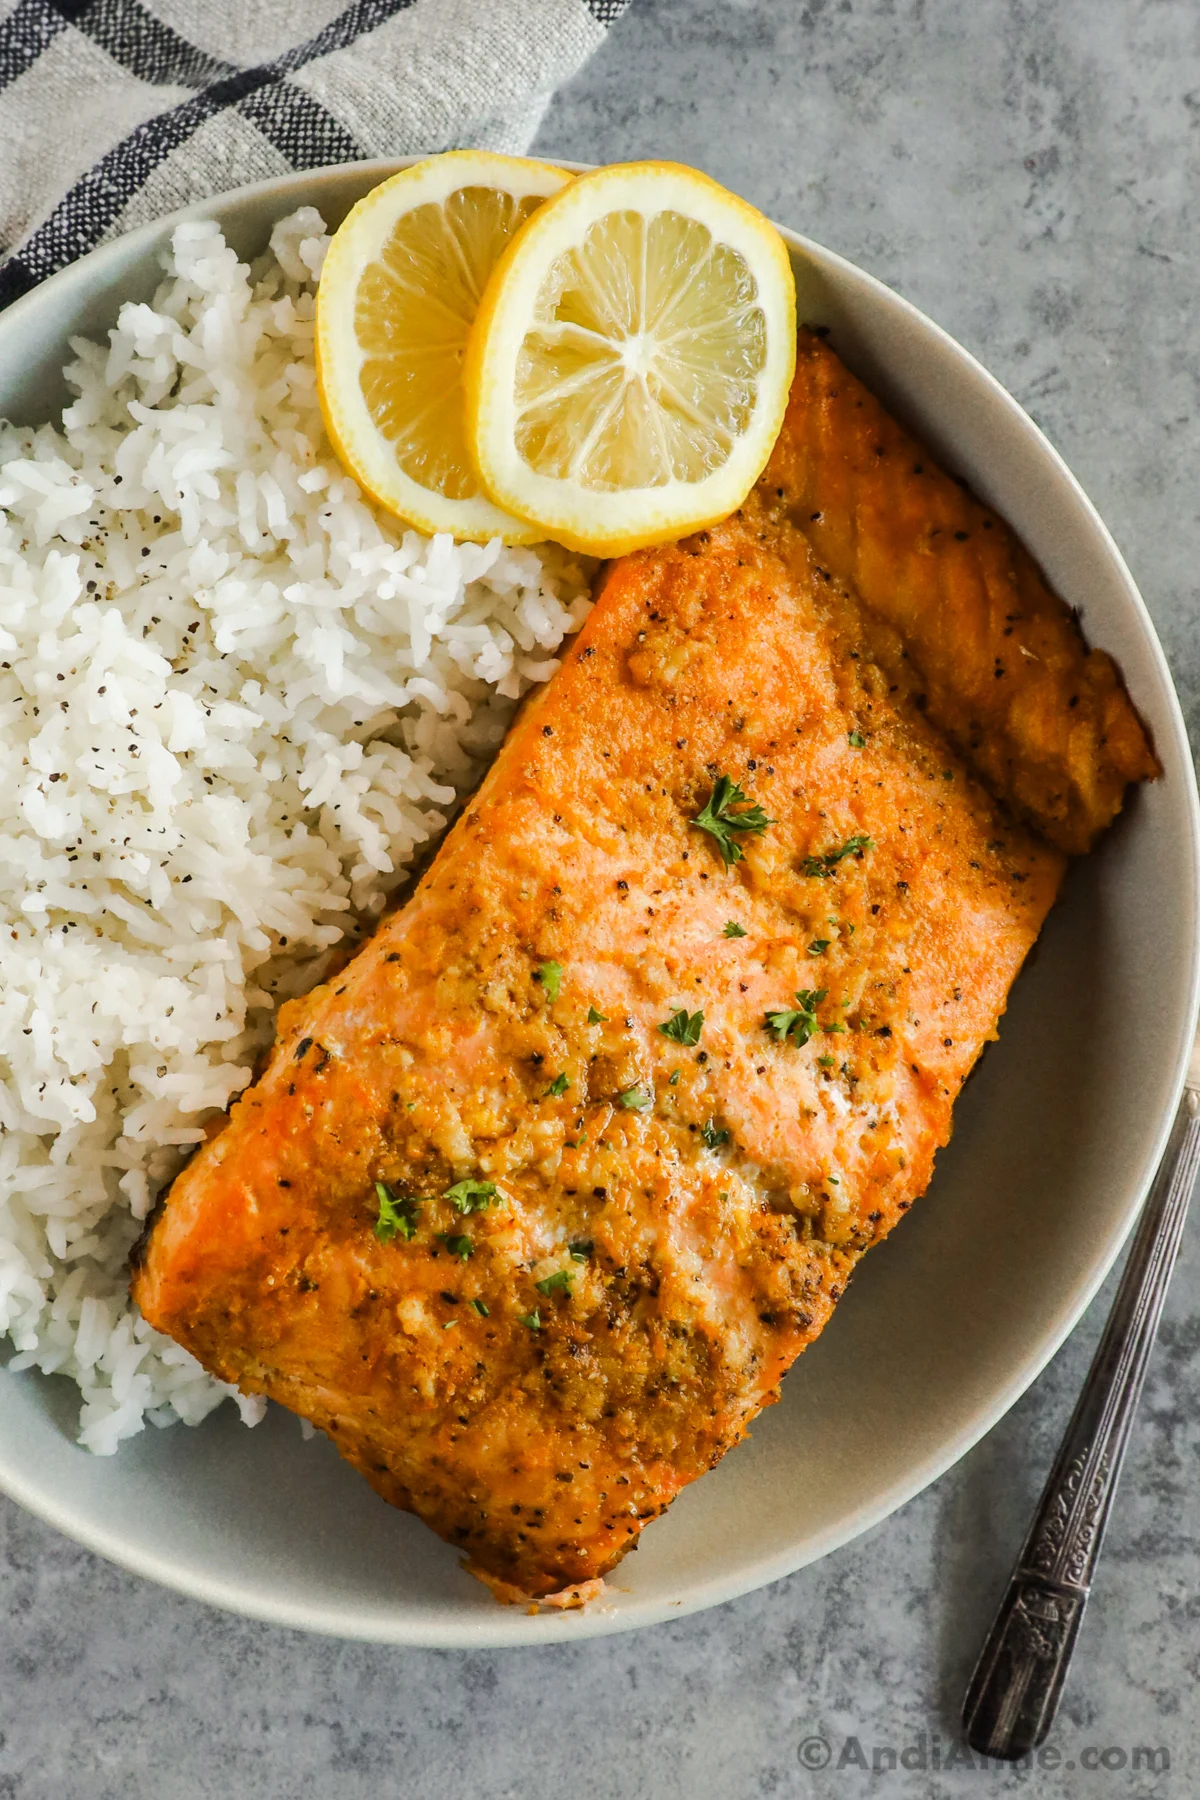 A plated with salmon fillet, rice and slices of lemon.